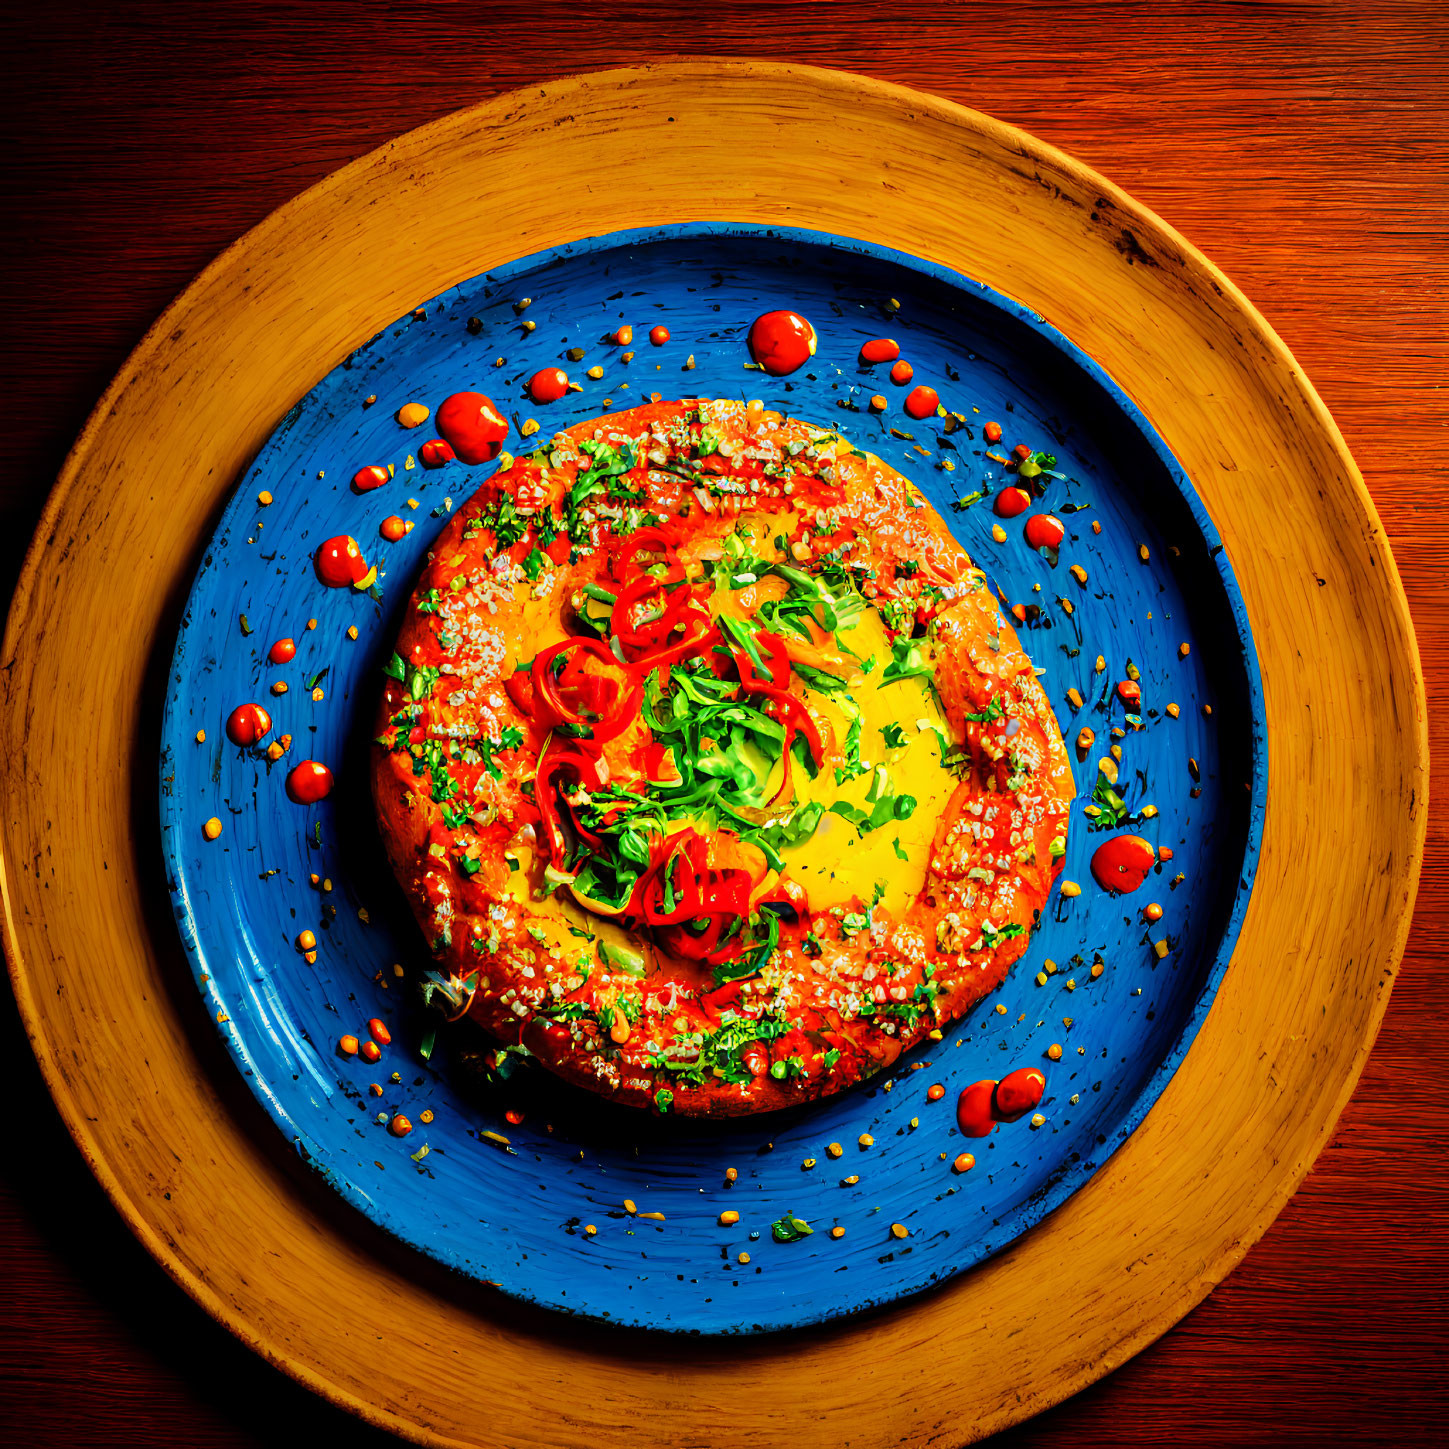 Colorful Creamy Dish with Herbs, Peppers, and Seeds on Blue Plate